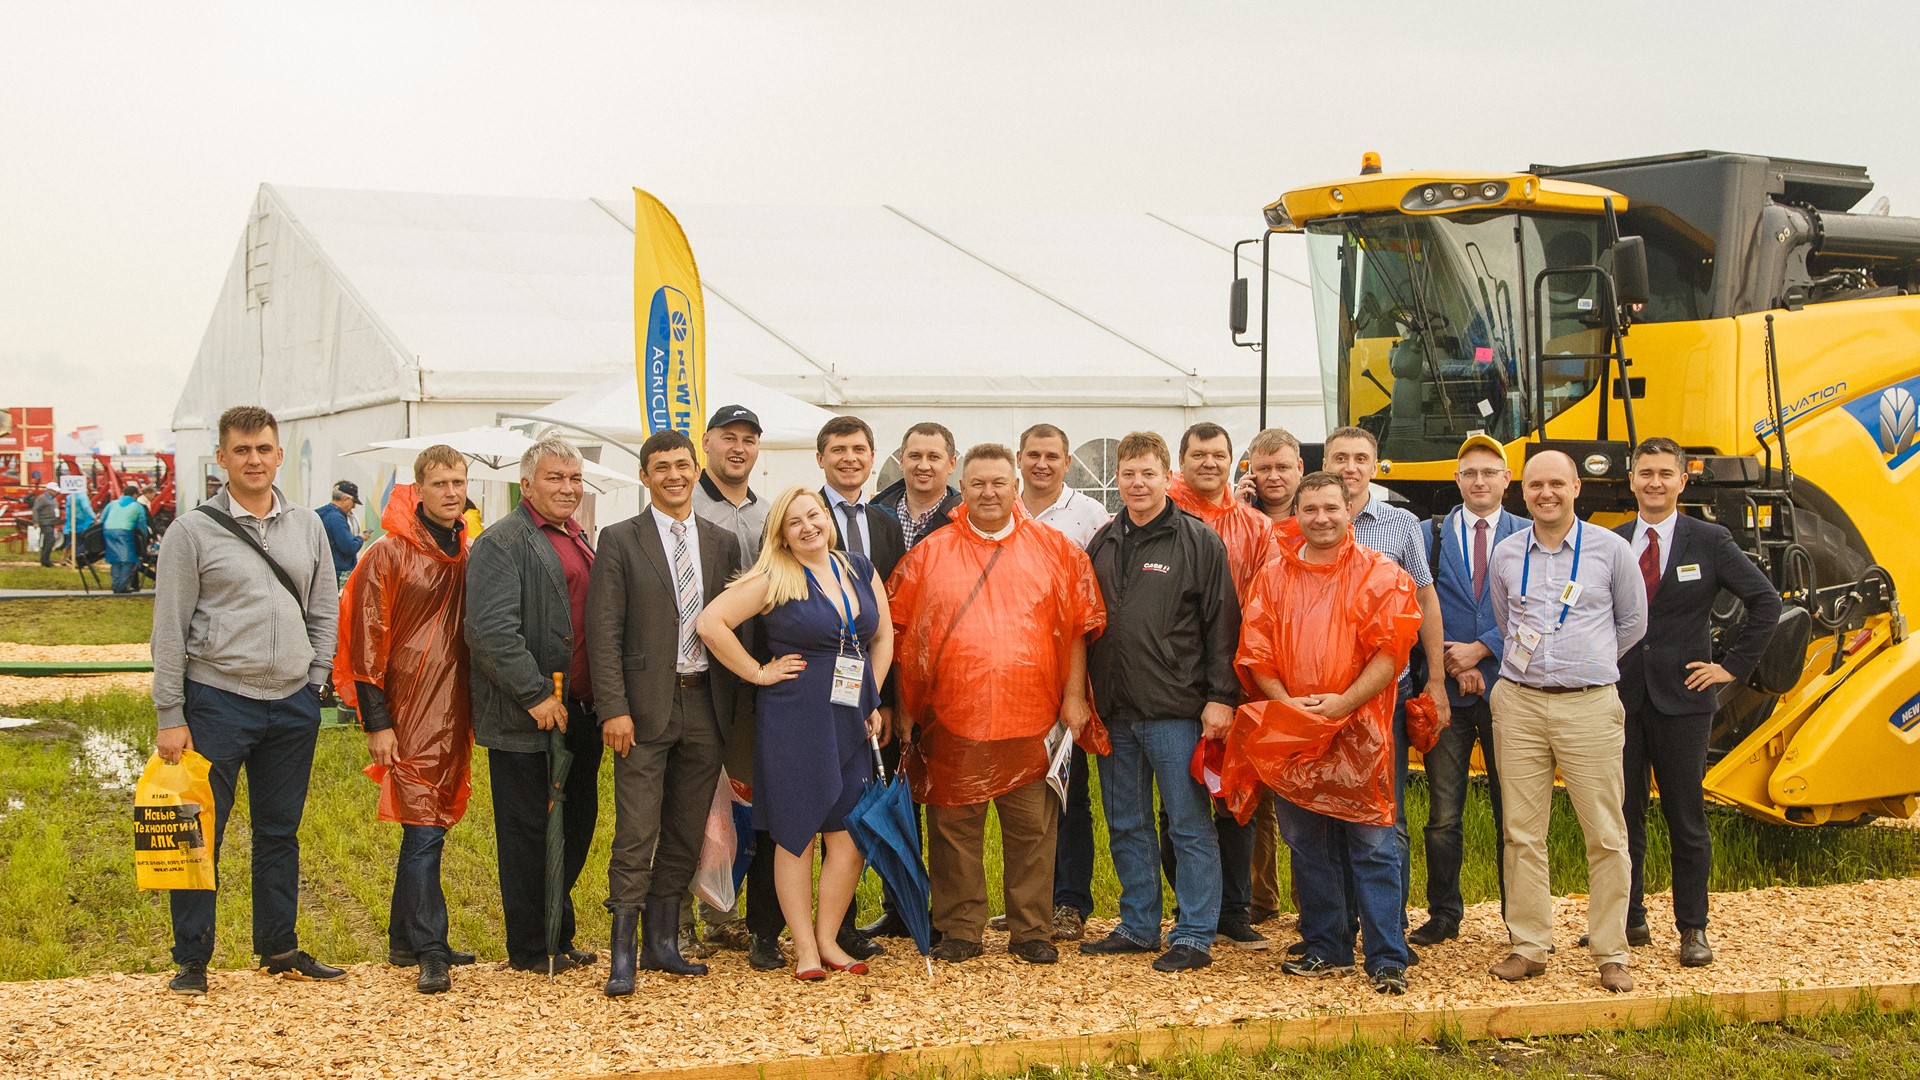 All- Russia Field Day 2017 with the new CX6090 Elevation combine harvester